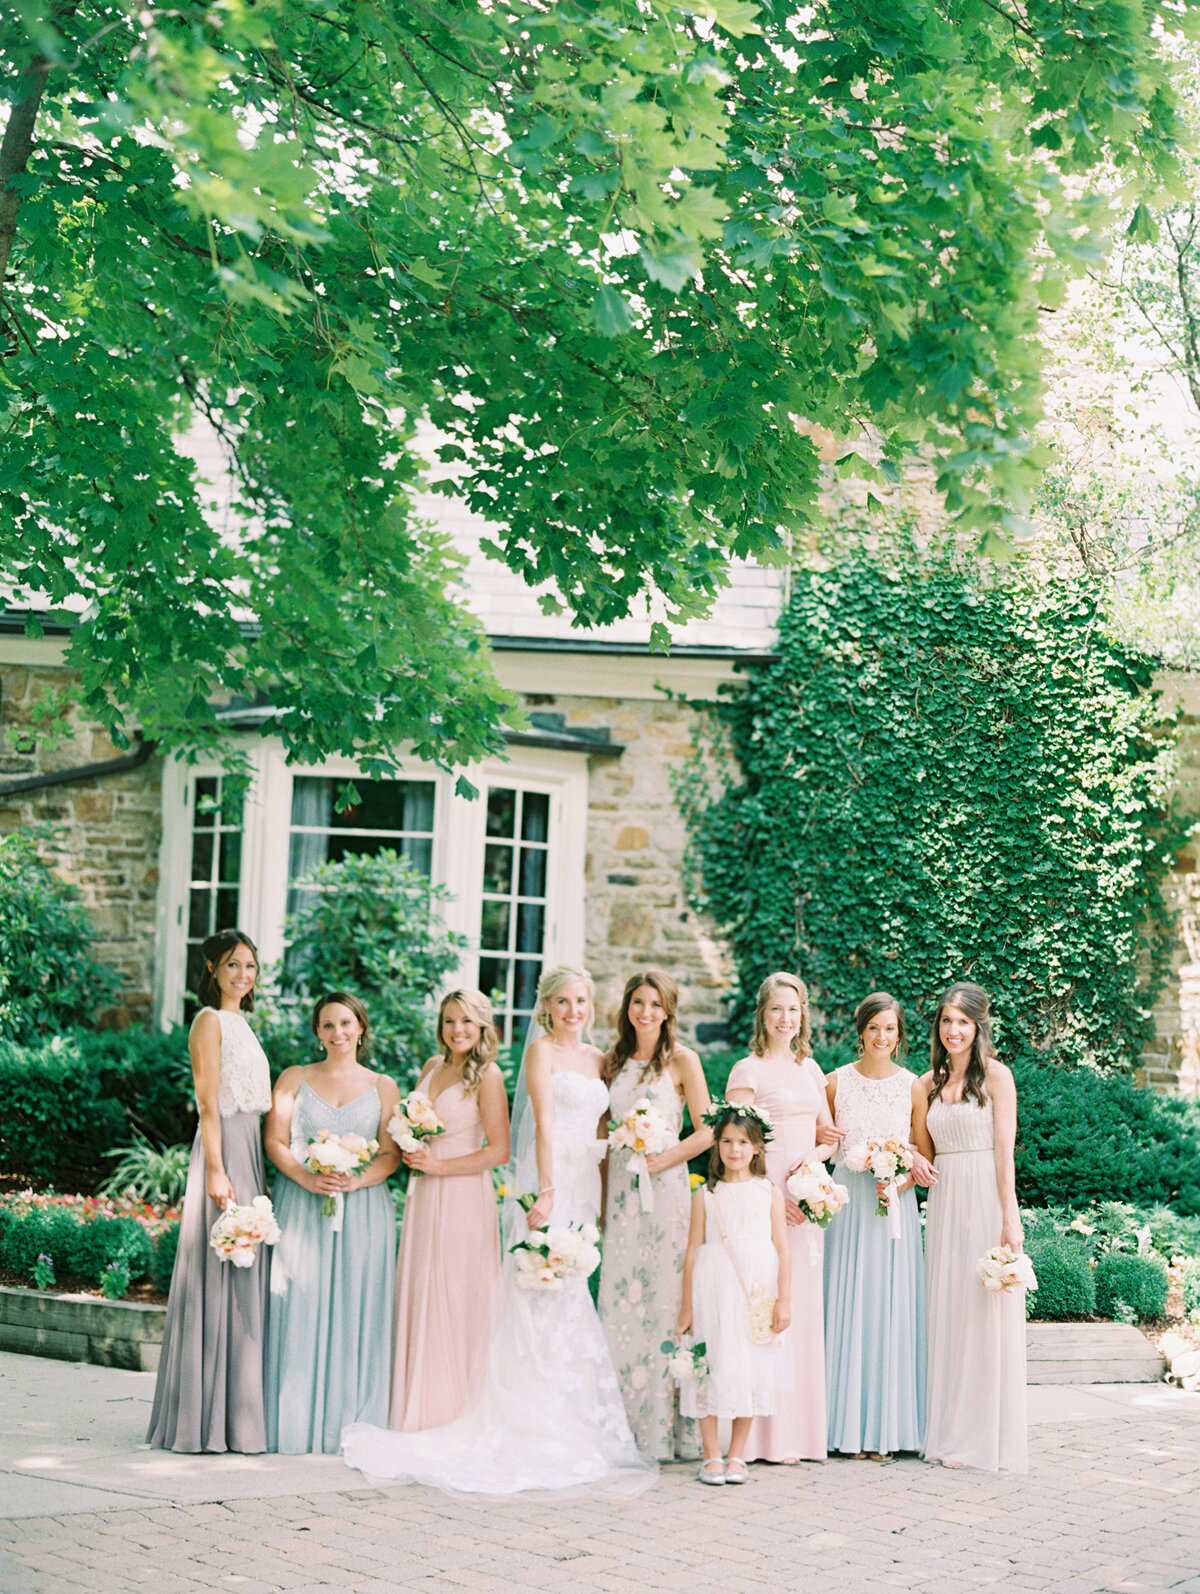 A beautiful summer day set the tone for a lovely outdoor wedding at Rocky Fork Country Club. 